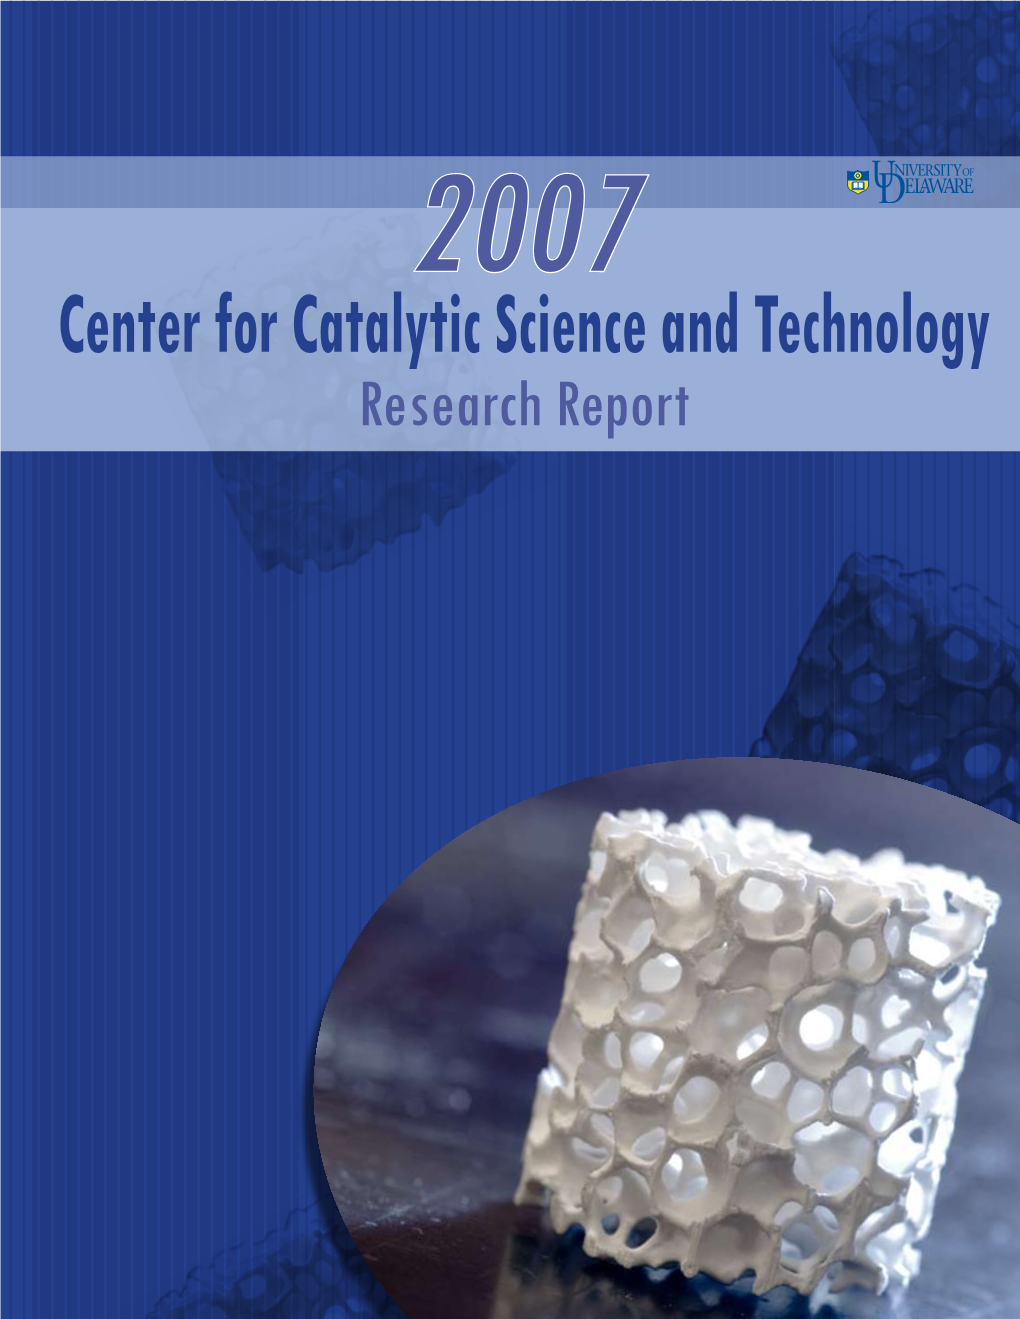 Center for Catalytic Science and Technology Research Report